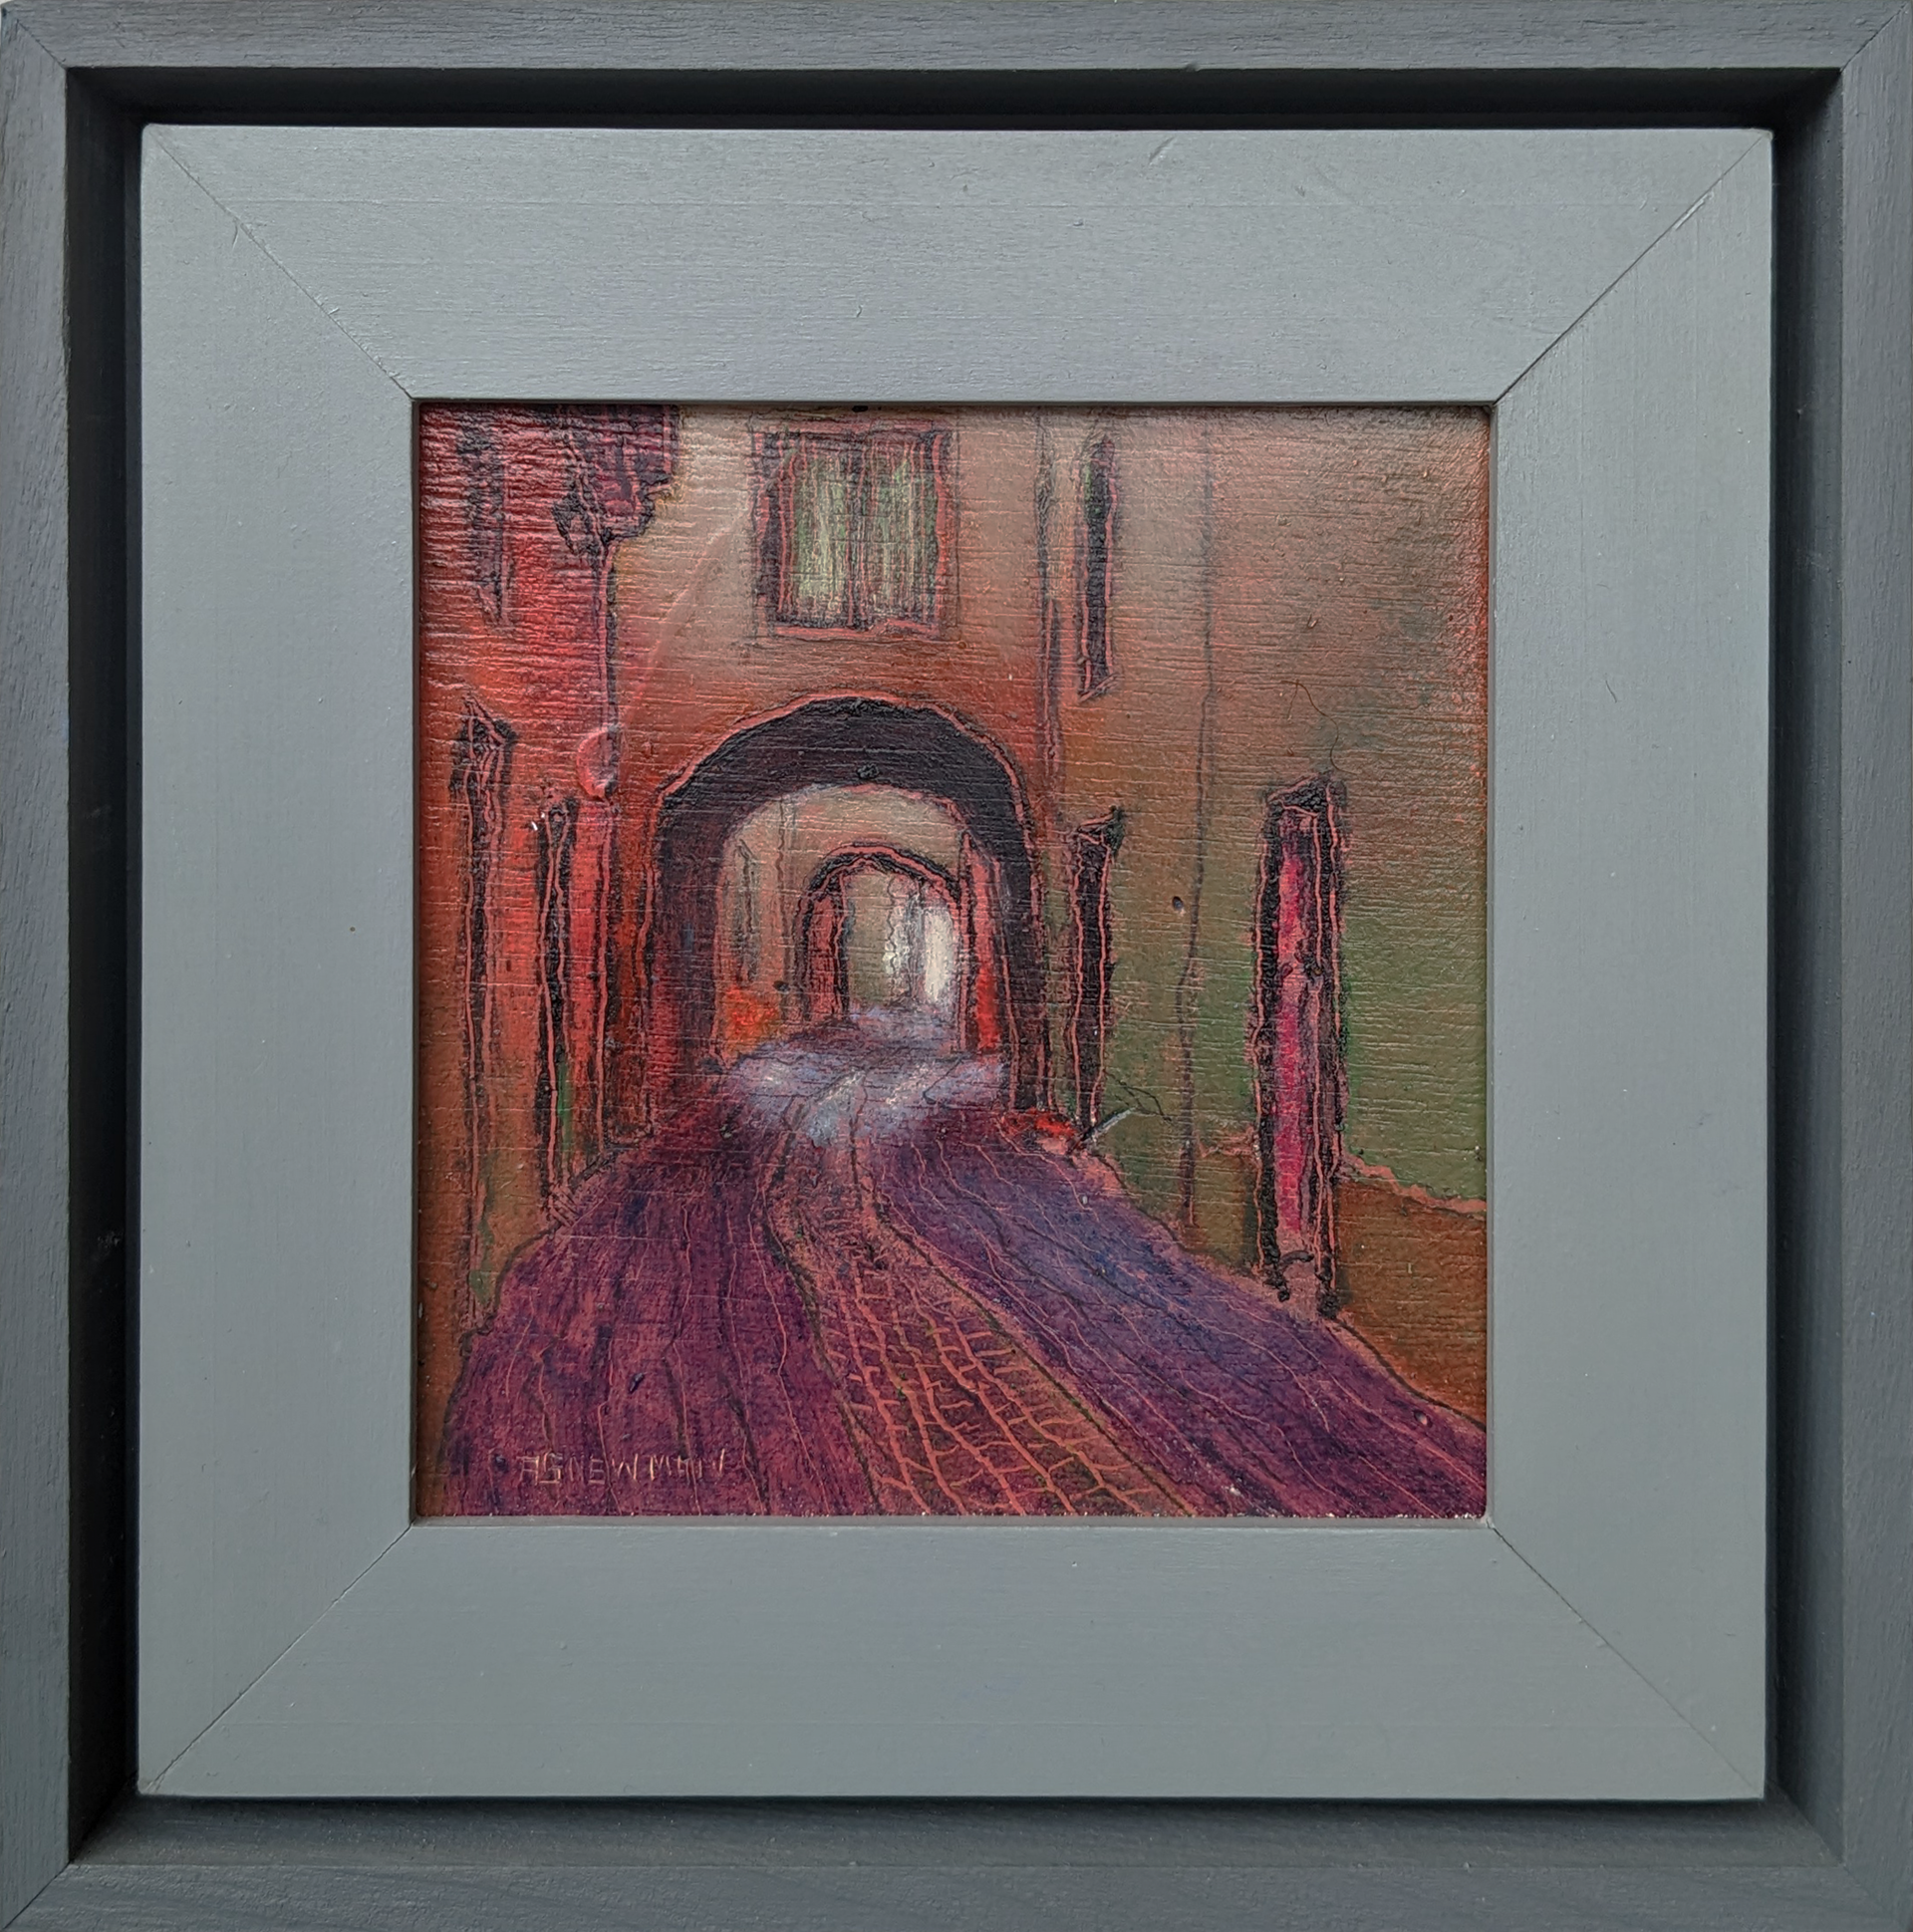 Passage with Arches (Tresques) by Andy Newman